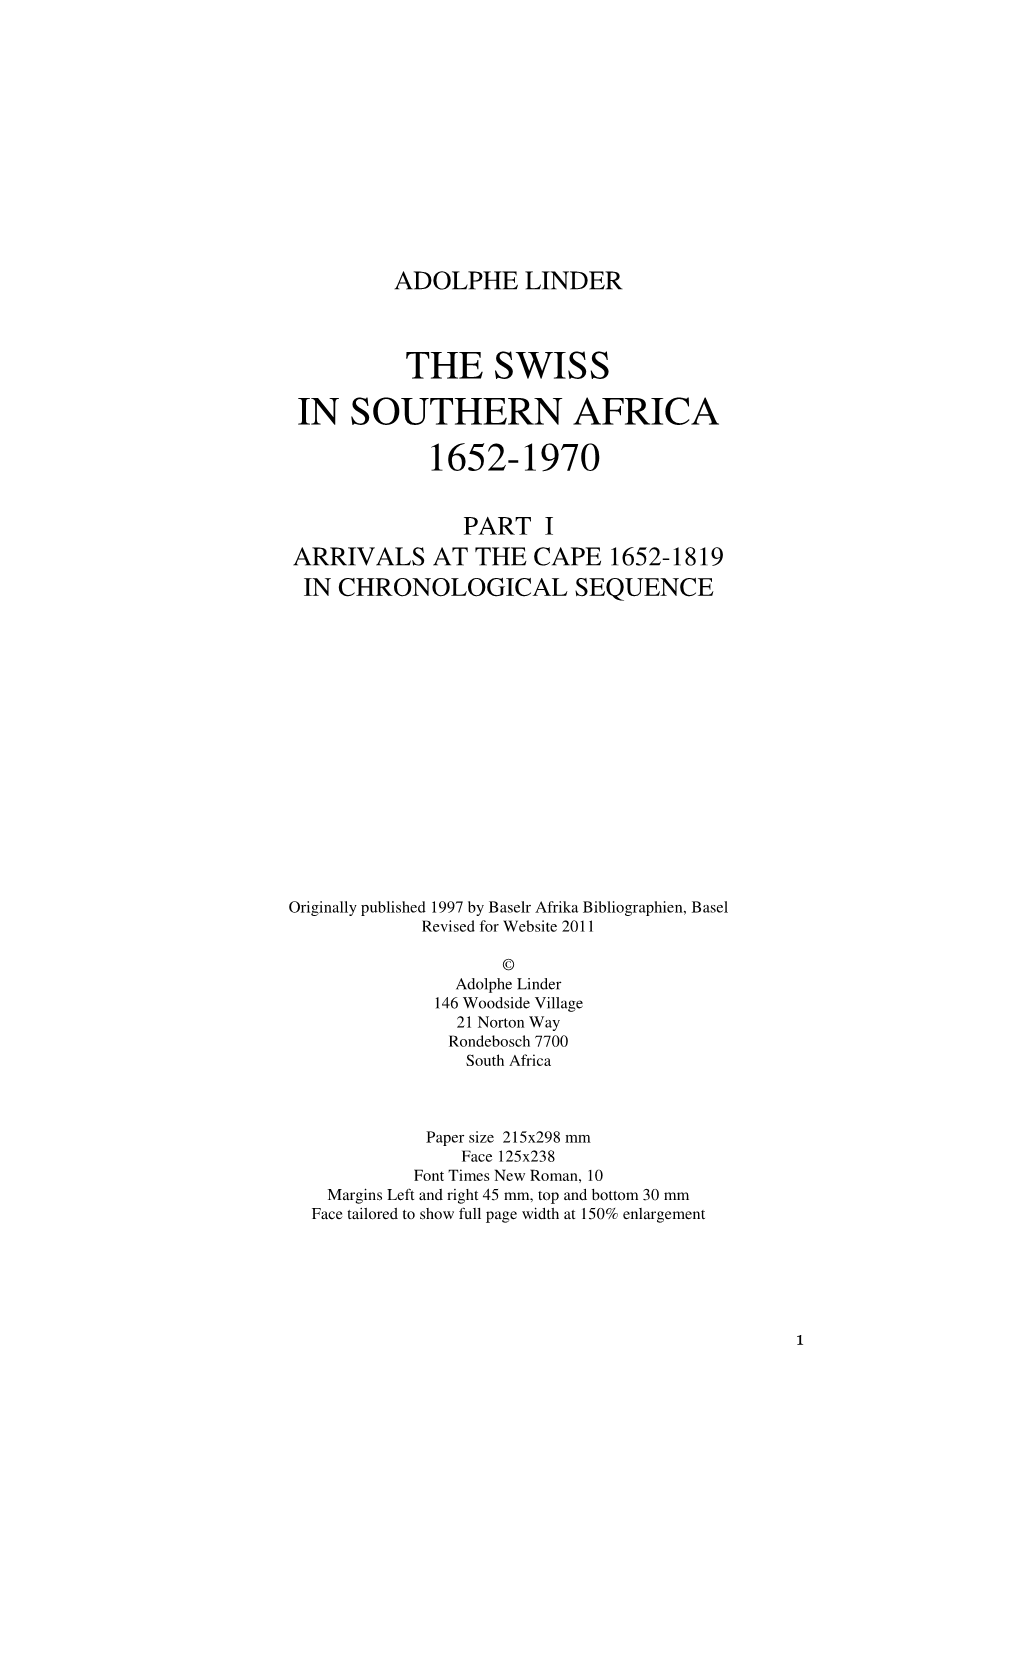 The Swiss in Southern Africa 1652-1970